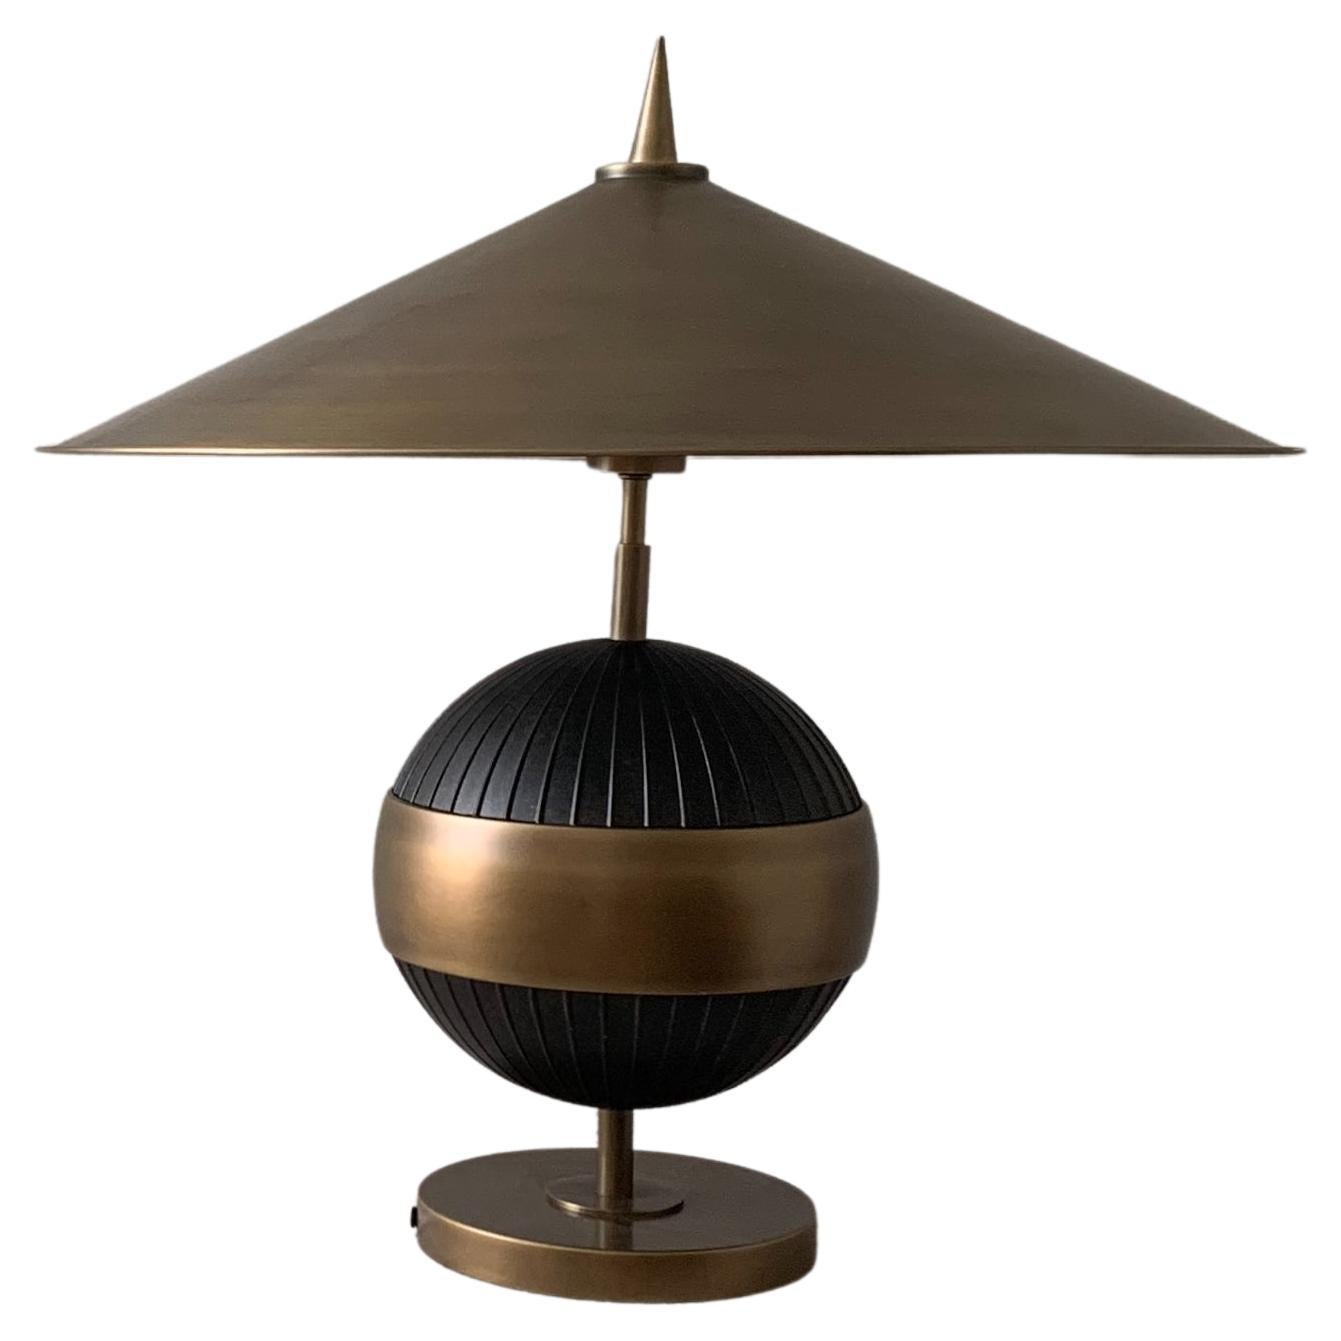 Antique brass and black “Chatta” table lamp by Currey & Company. Sculptural silhouette grounded by an oversized shade. Dimensions are taken for overall width of shade.